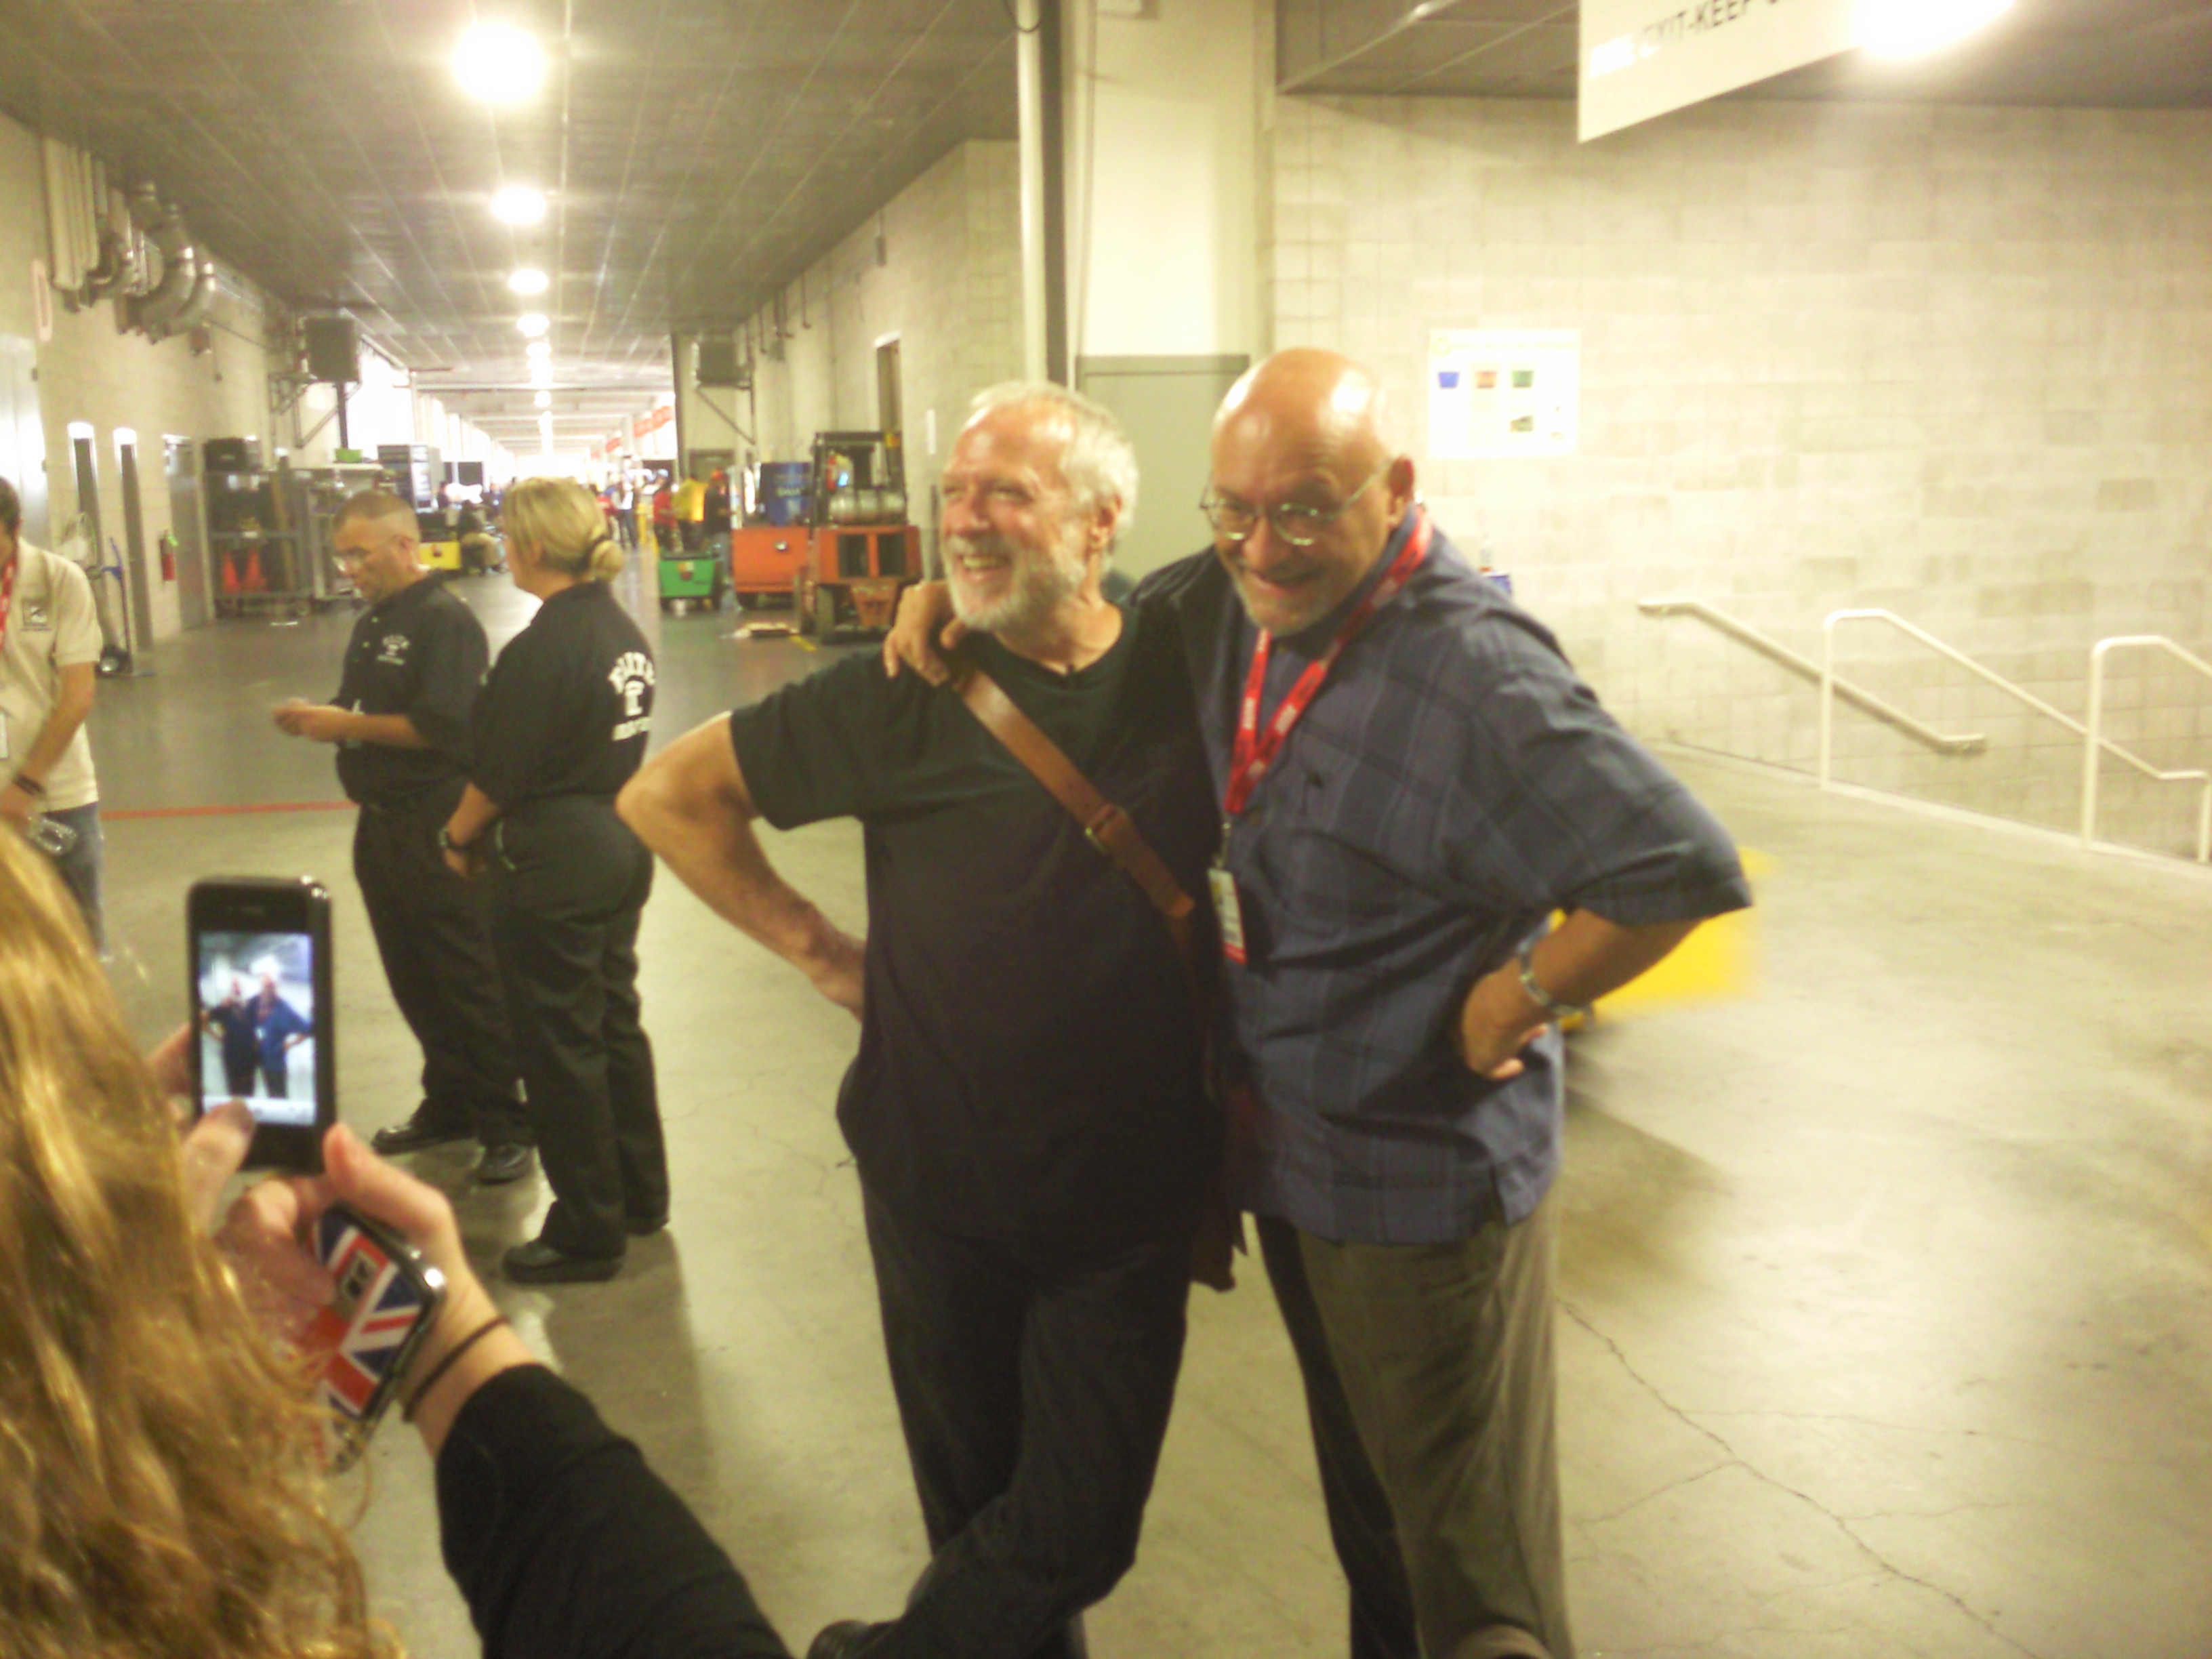 L-R: Drew Struzan and Frank Darabont, prior to the screening of highlights from the upcoming feature 